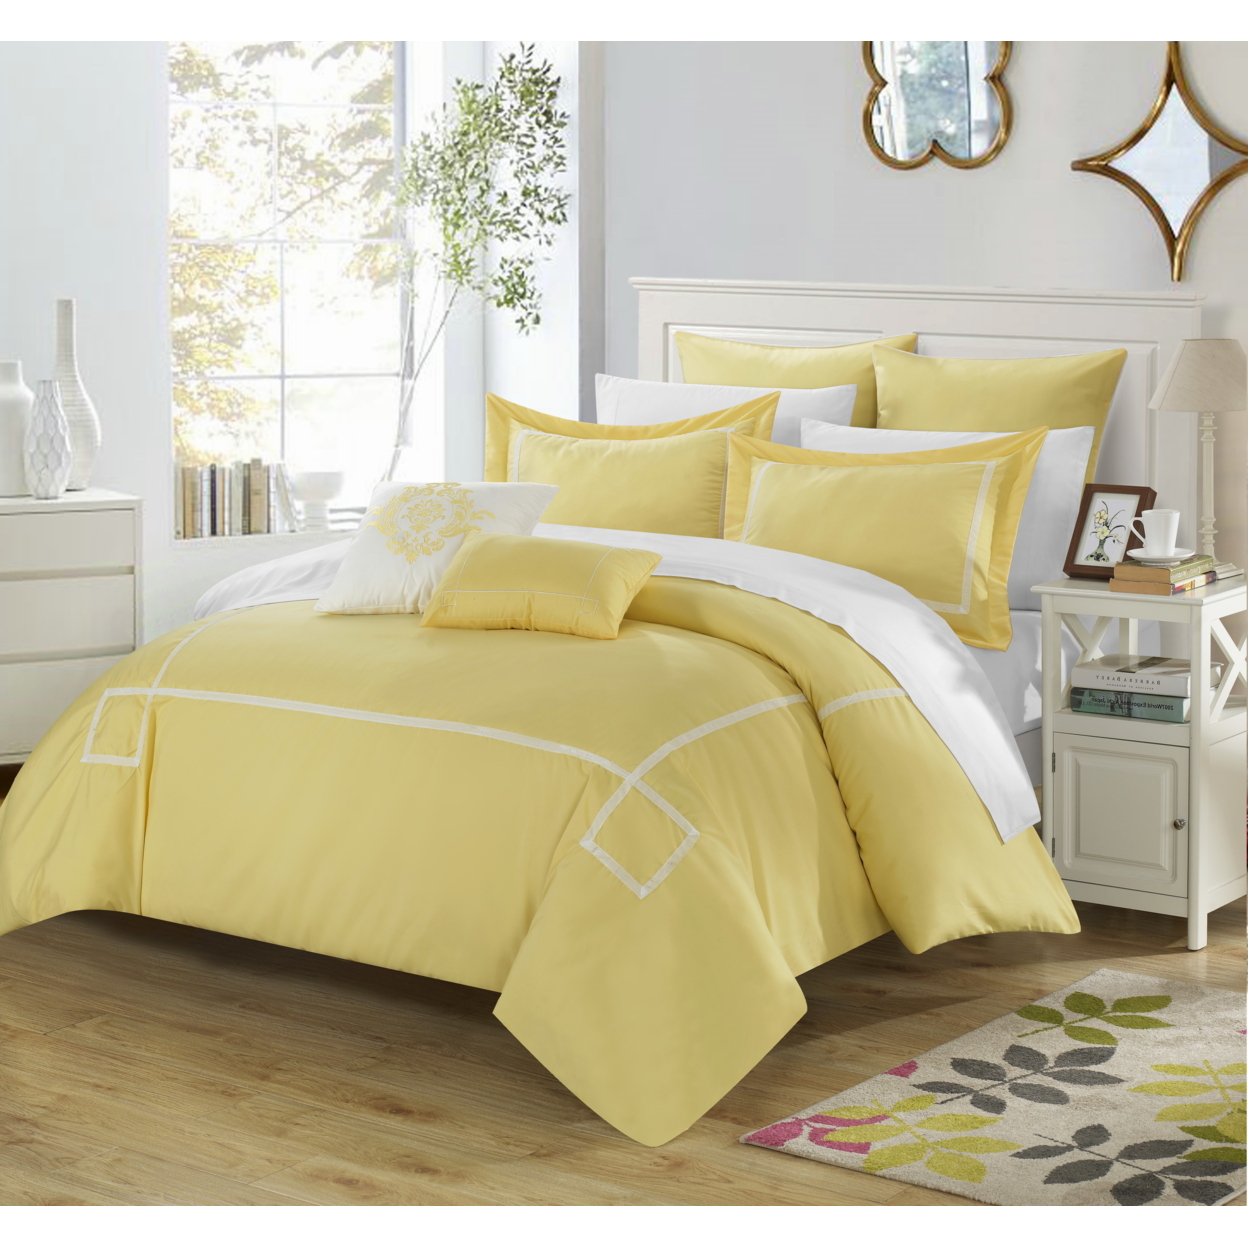 Chic Home Wilma - 7 Piece Embroidered Comforter Set - Yellow, Queen